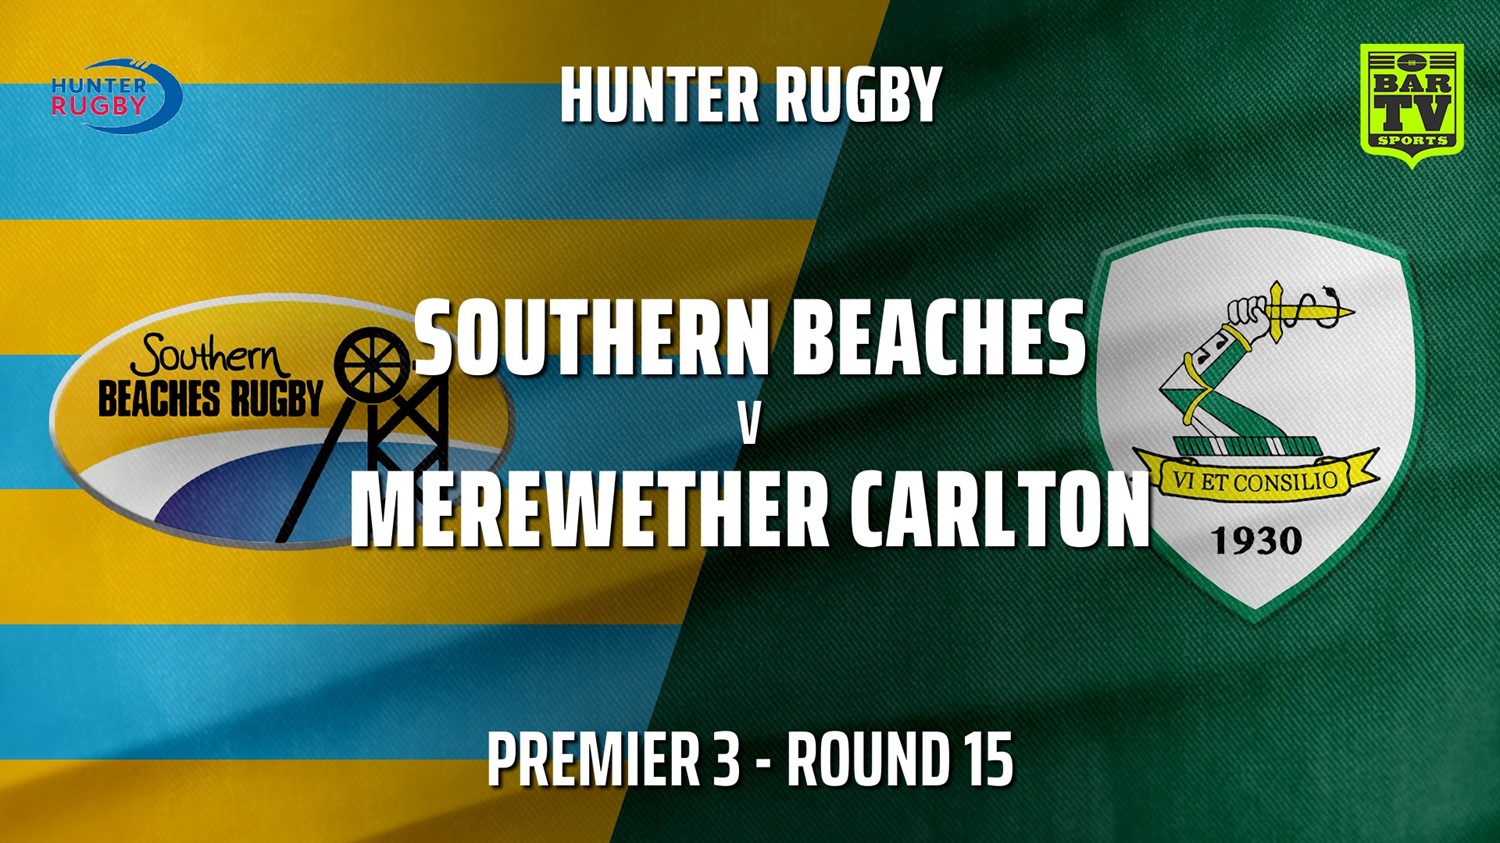 210731-Hunter Rugby Round 15 - Premier 3 - Southern Beaches v Merewether Carlton Slate Image